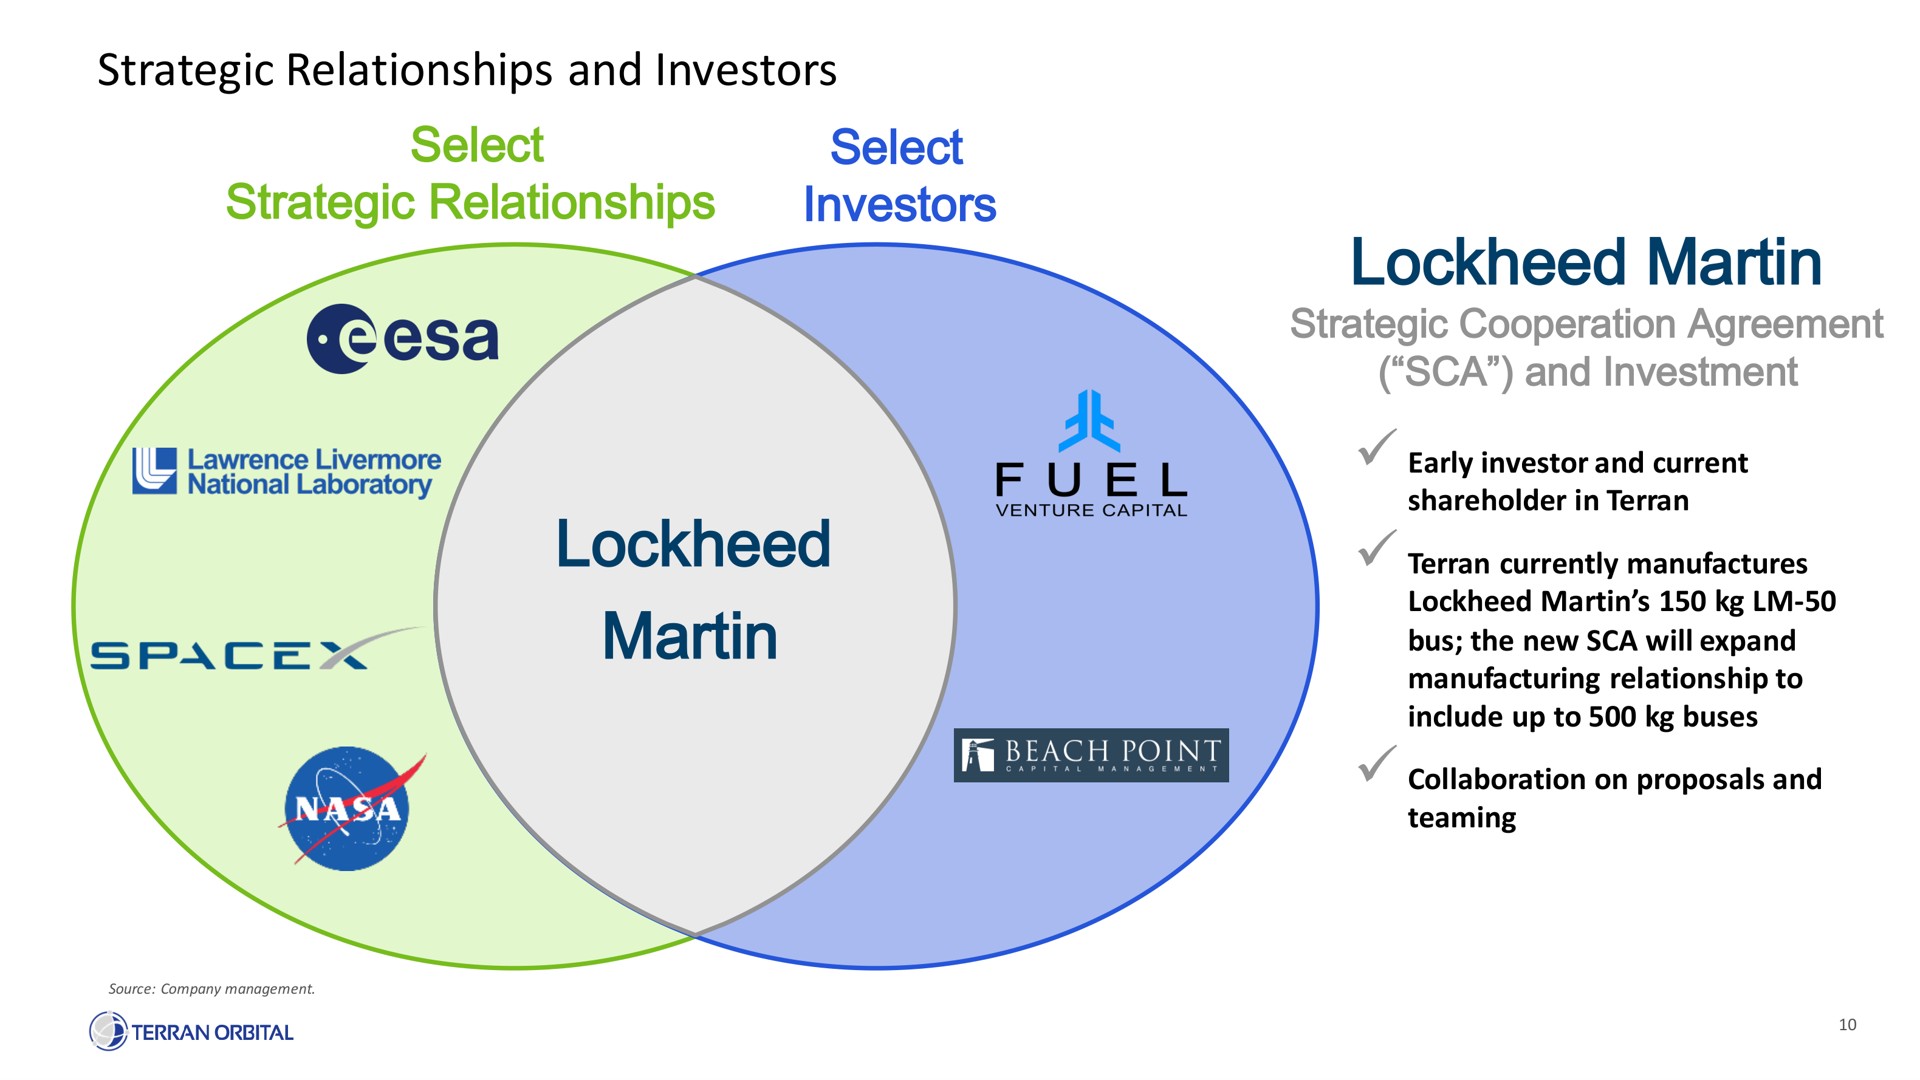 strategic relationships and investors select strategic relationships select investors martin martin strategic agreement and investment | Terran Orbital